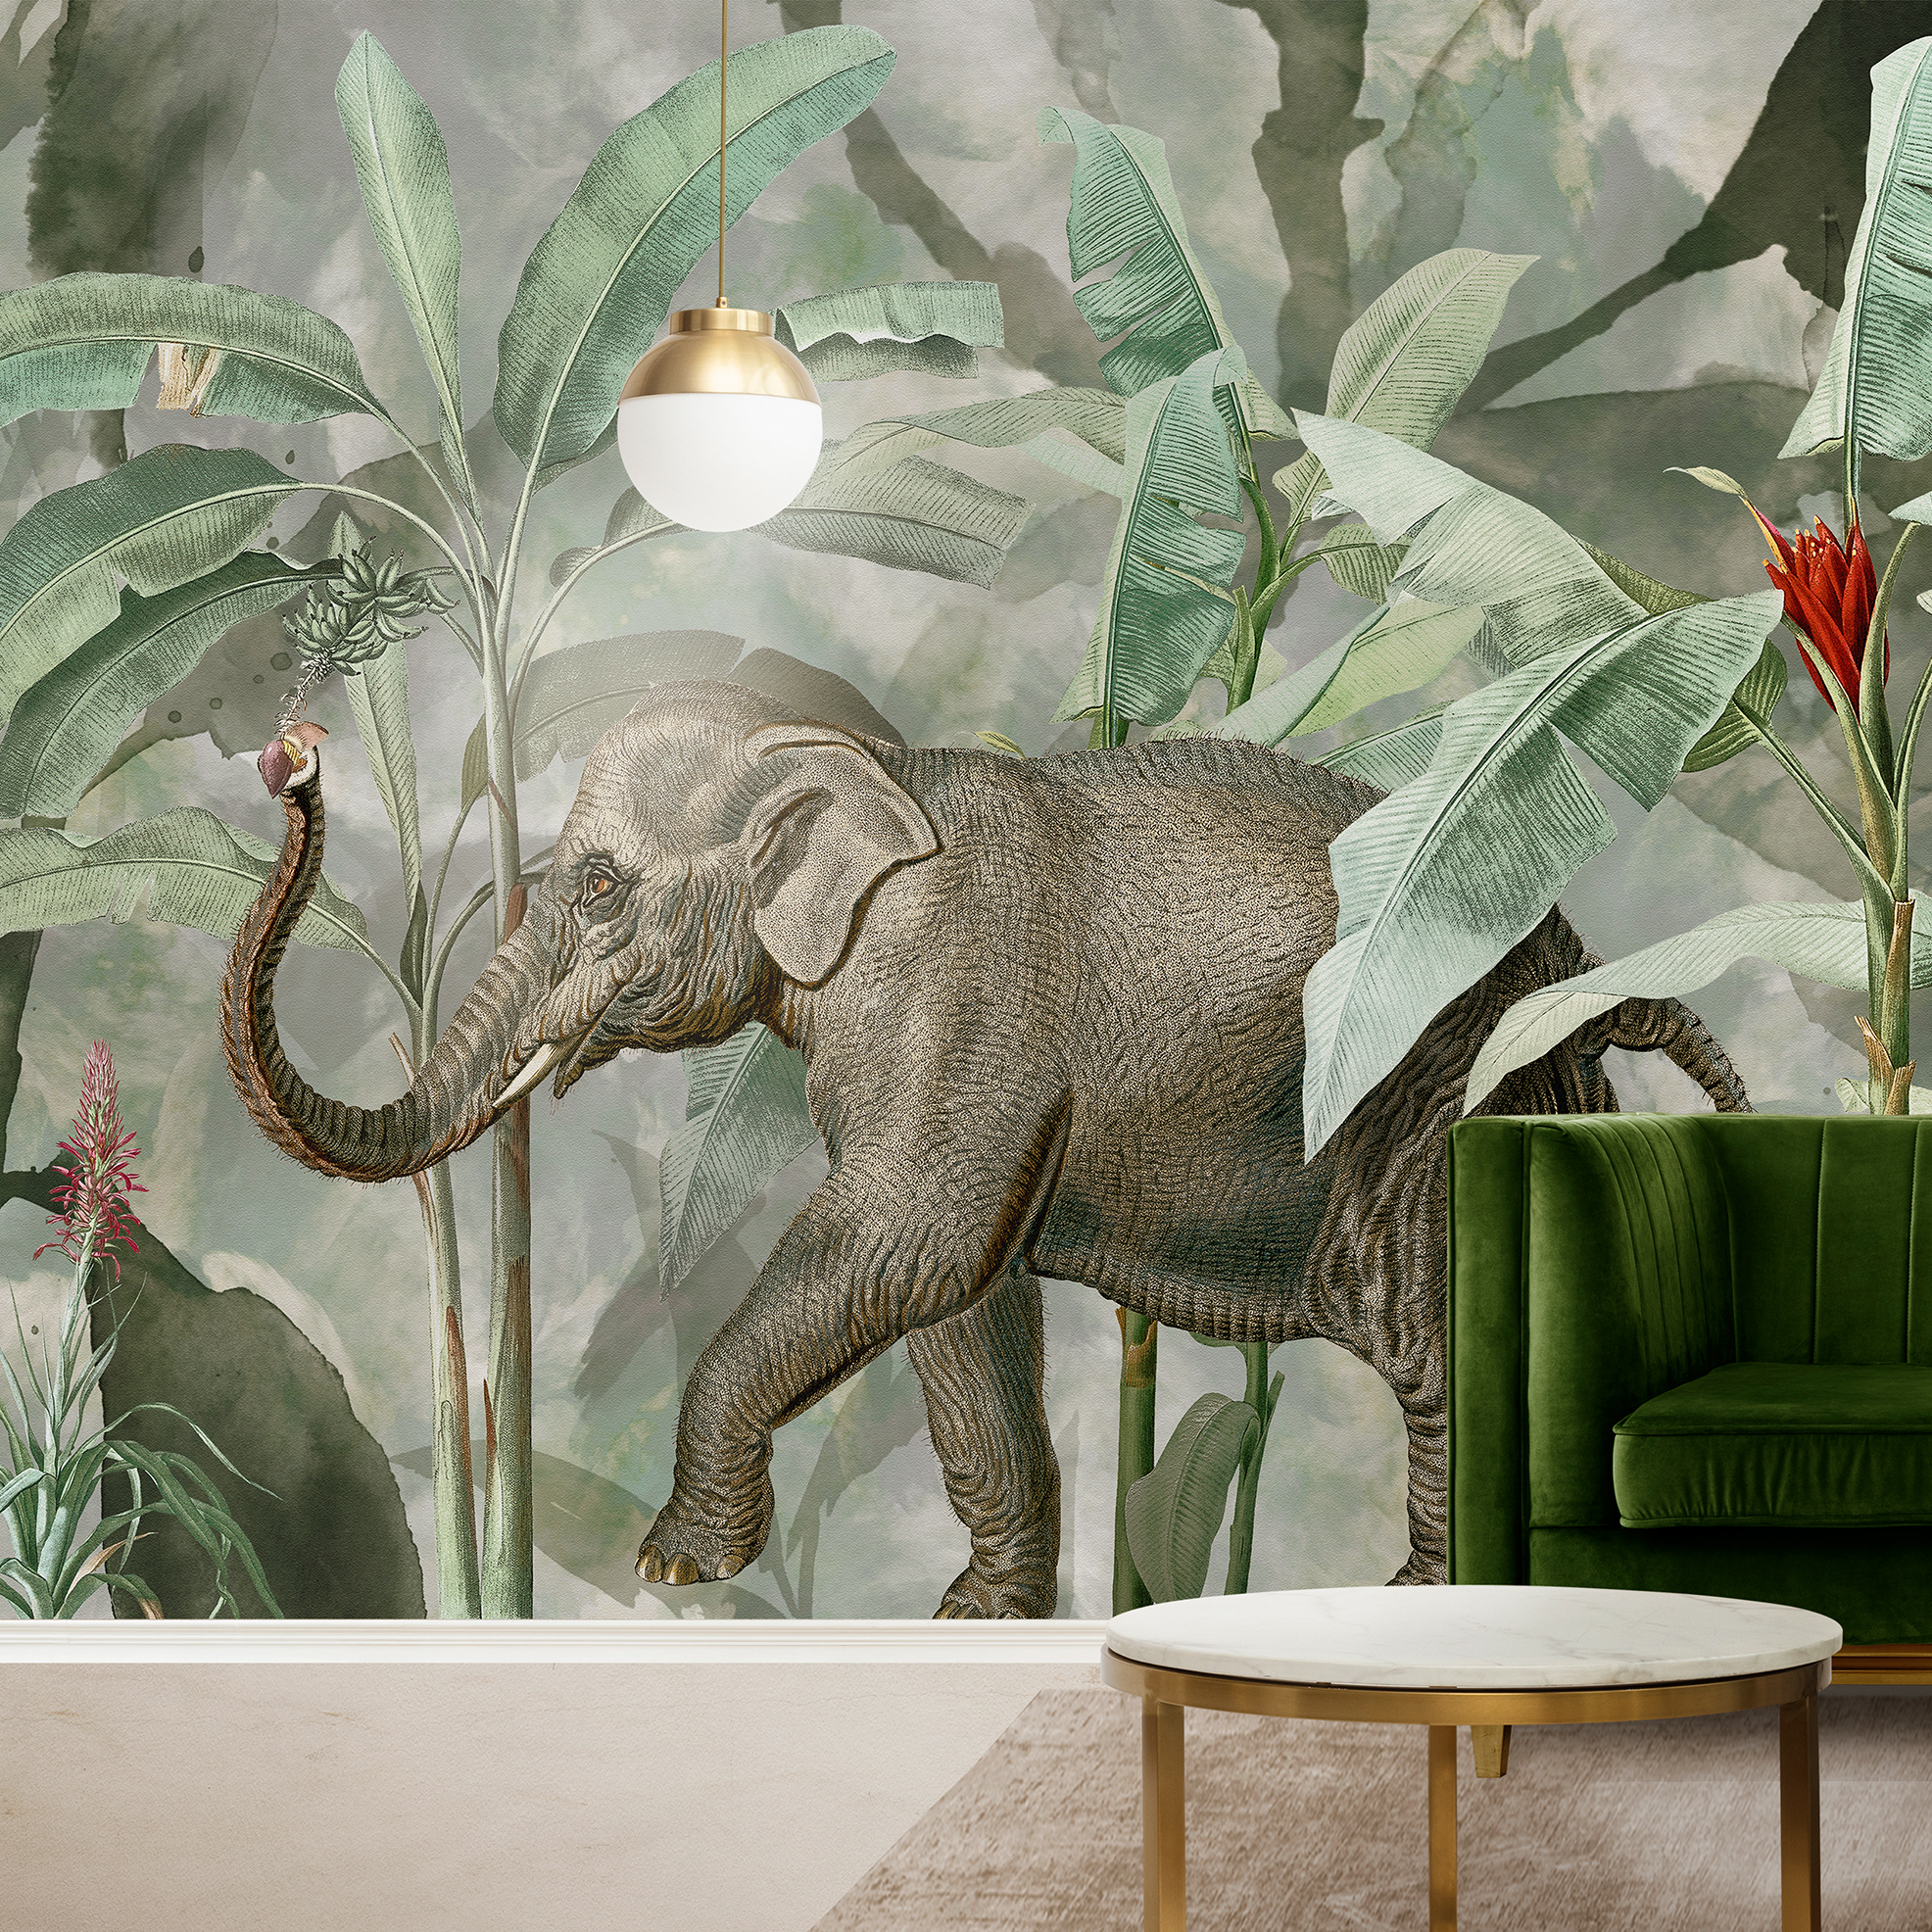 Exotic animal wallpaper with elephant